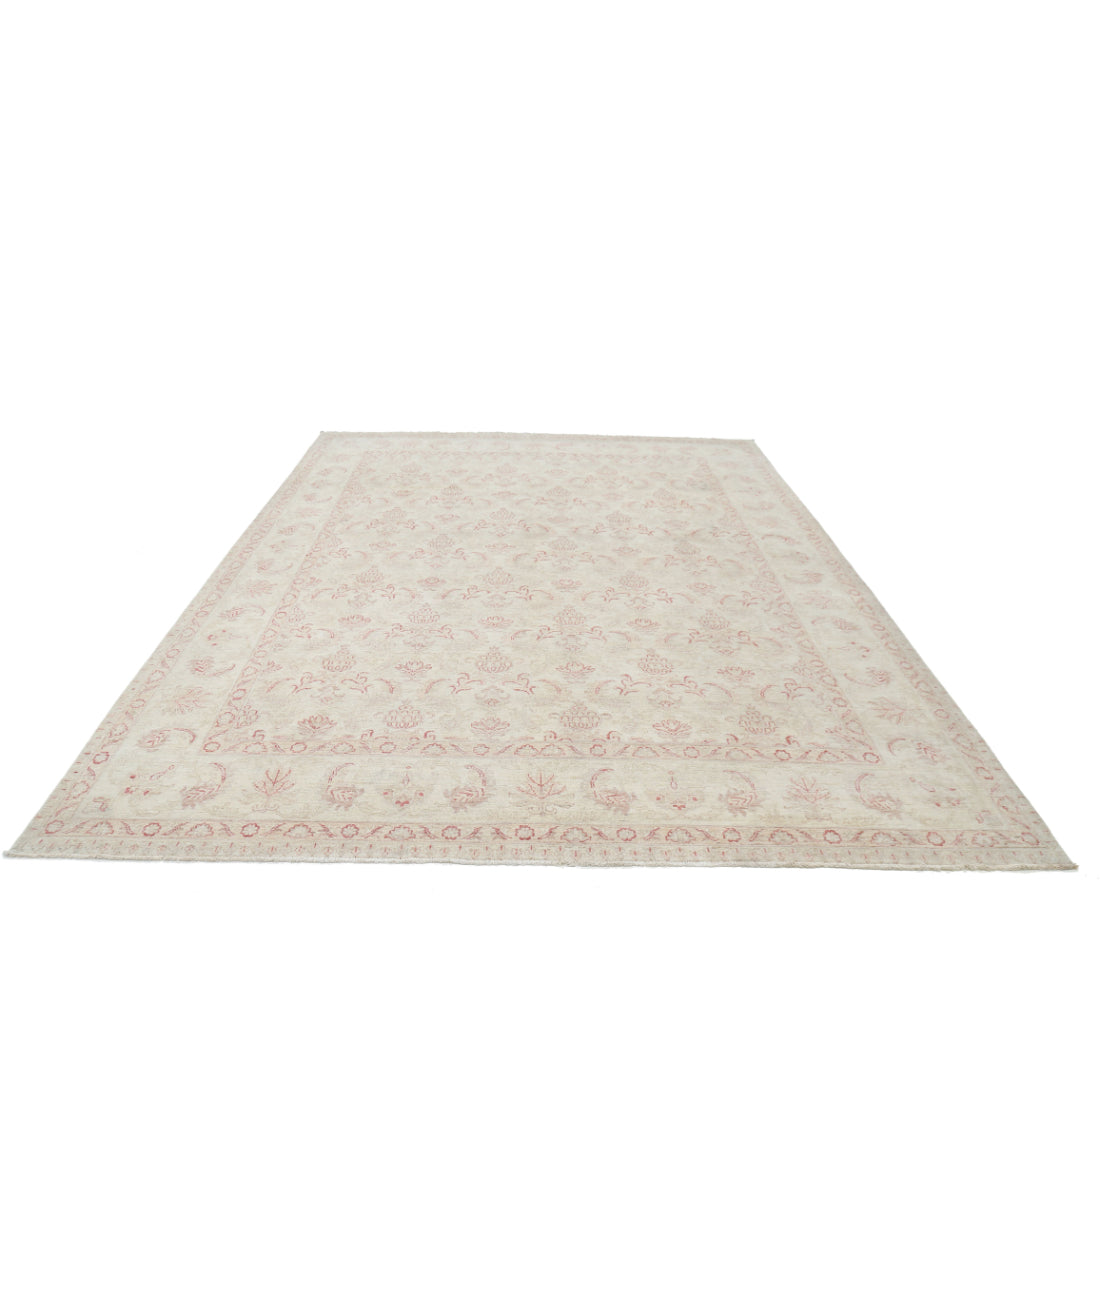 Hand Knotted Serenity Wool Rug - 8'10'' x 11'5'' 8'10'' x 11'5'' (265 X 343) / Ivory / Red